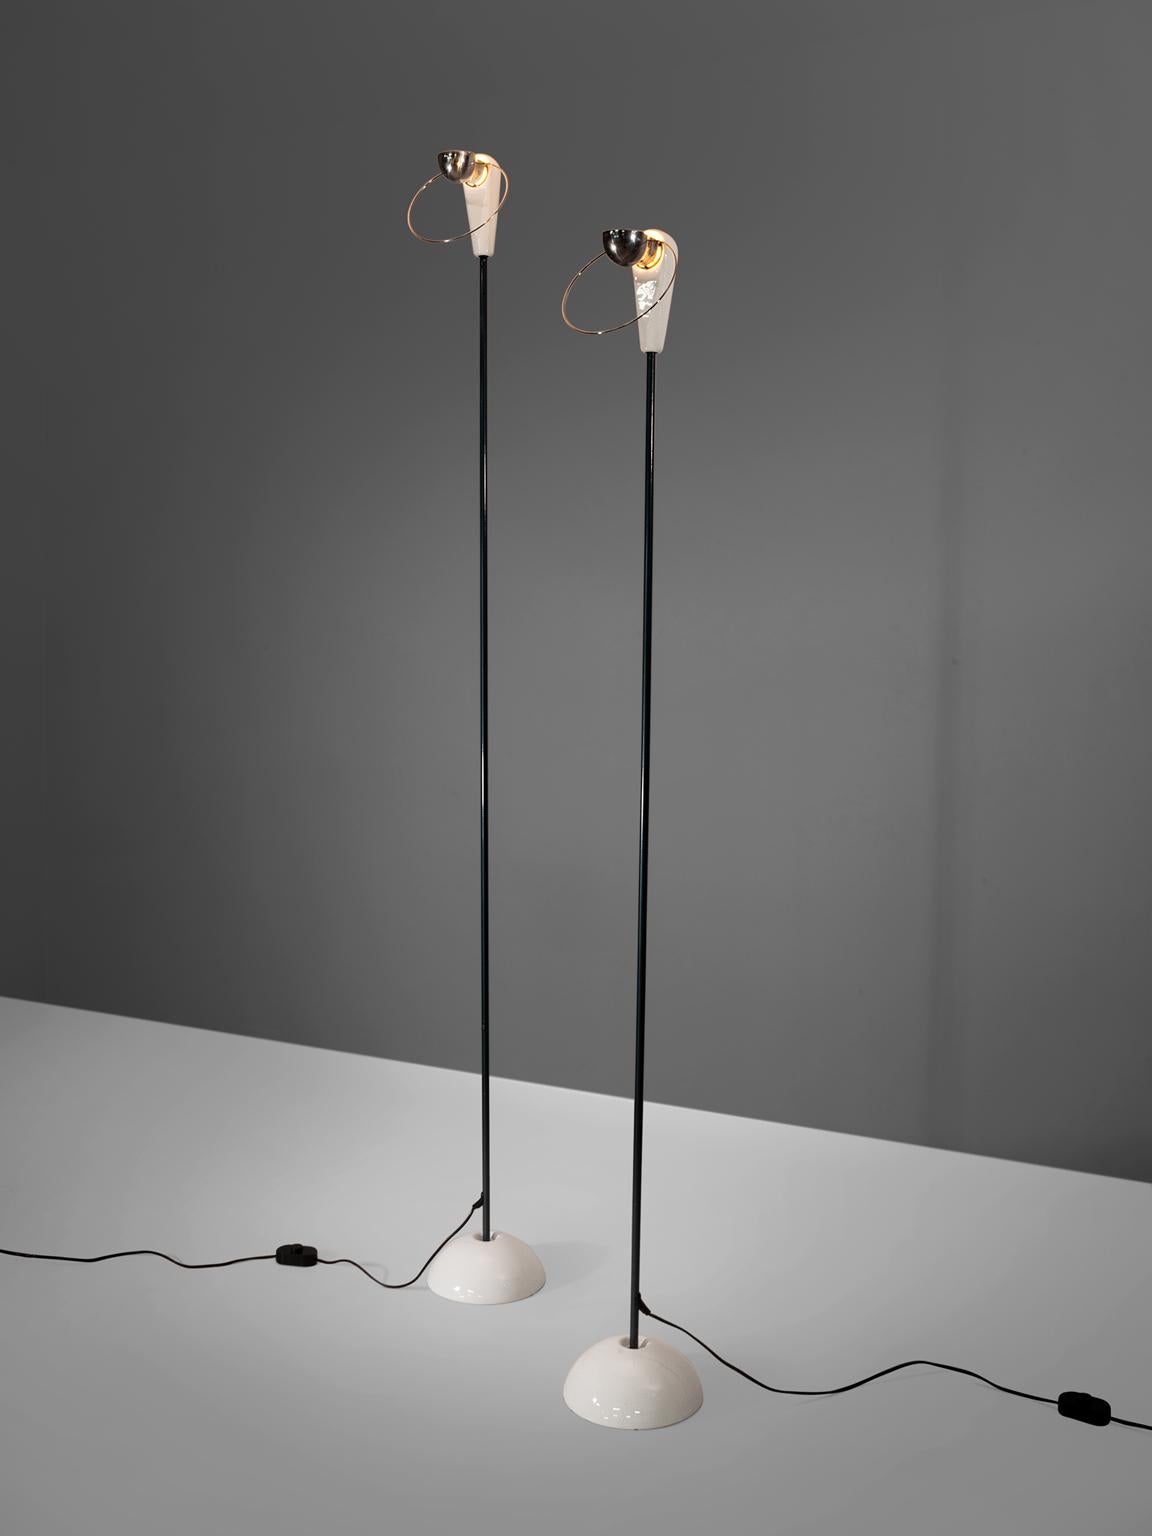 Achille Castiglioni for Flos, set of two 'Bip- Bip' floor lamps, made in aluminium and porcelain, Italy, 1976. 

These two skinny floor lamps are standing on a ceramic round base. The body of these lamps is made out of aluminium. The shape of